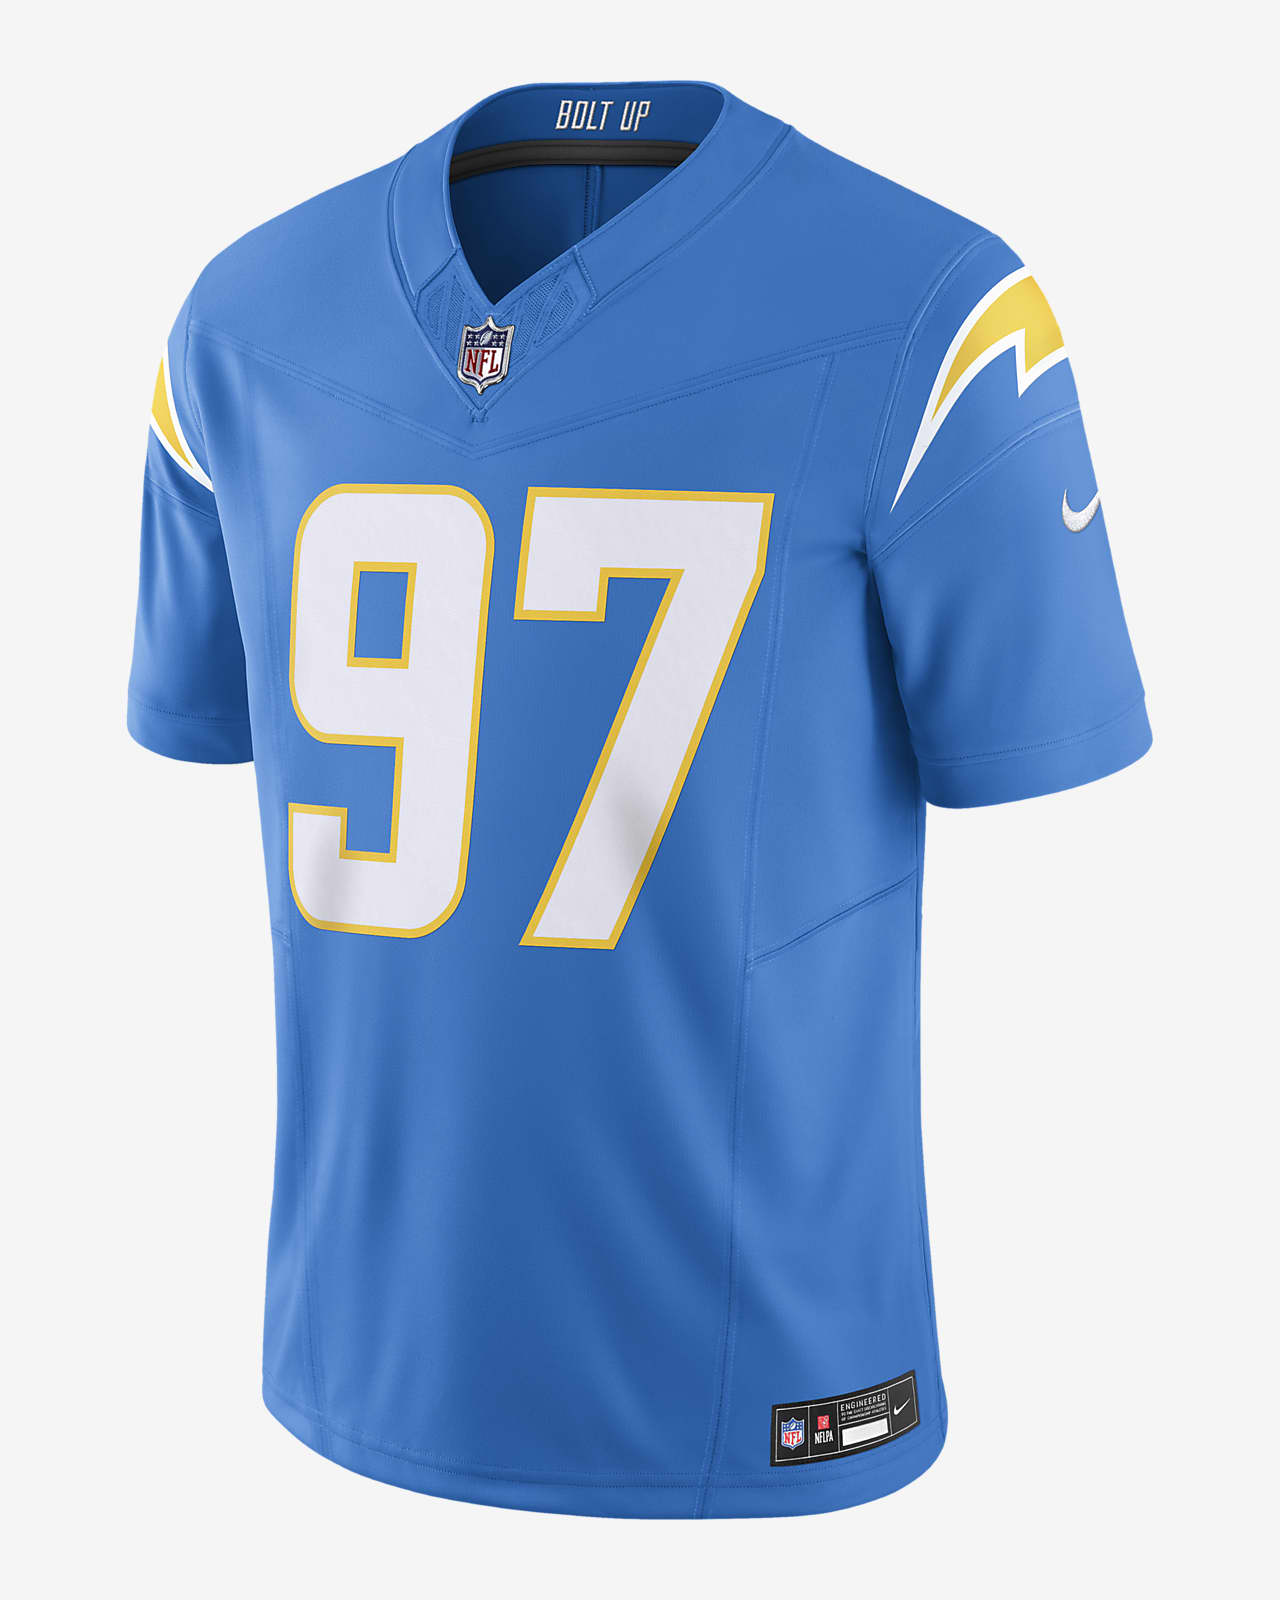 Joey Bosa Los Angeles Chargers Men's Nike Dri-FIT NFL Limited Football Jersey